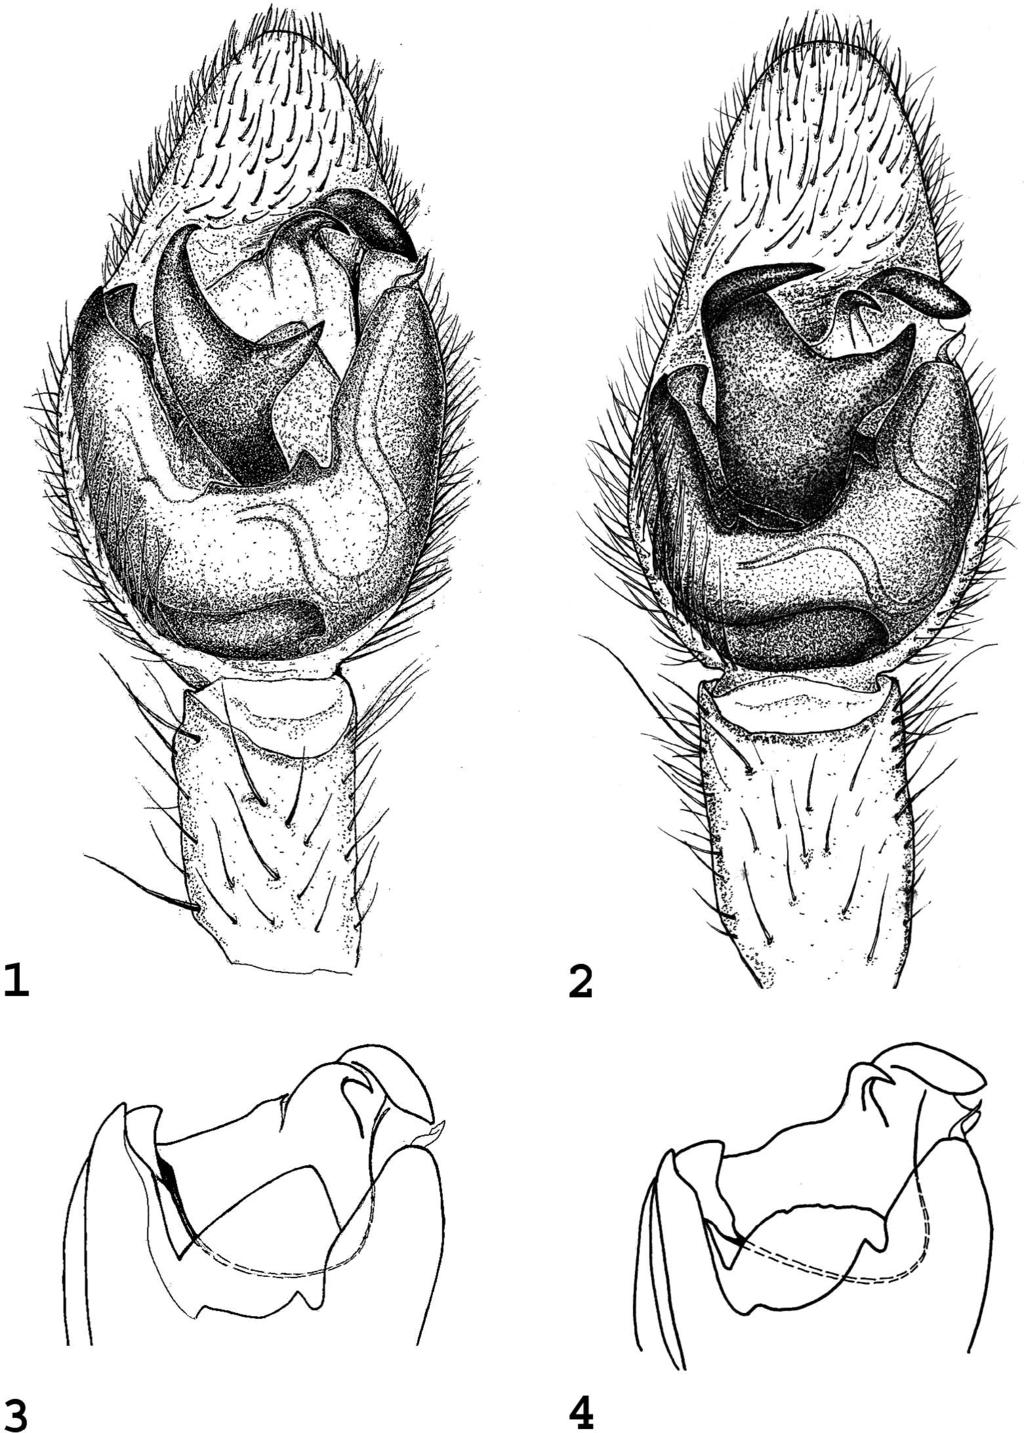 154 THE JOURNAL OF ARACHNOLOGY Figures 1 4. Male palp of Trebacosa species: 1. Left palp of T. europaea, ventral view; 2. Left palp of T. marxi, ventral view; 3.